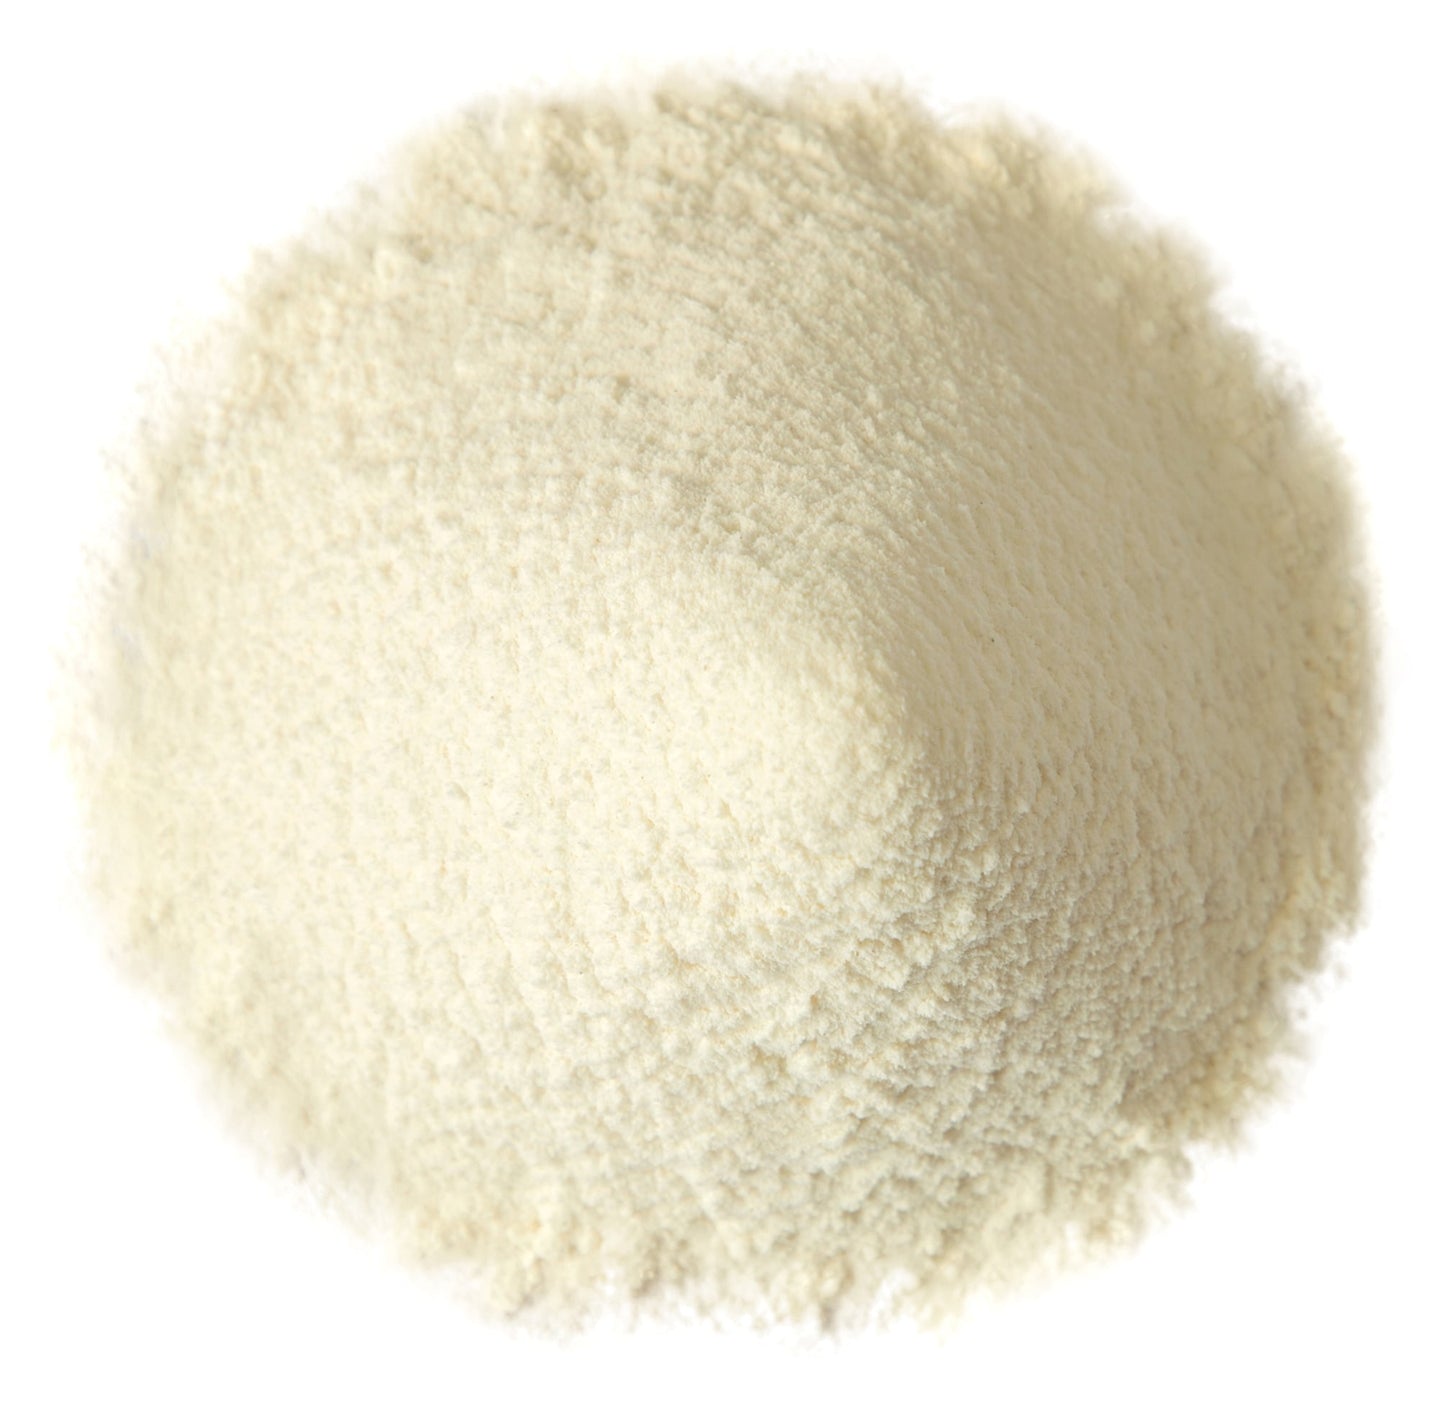 Apple Powder - Unsulfured, Made from Raw Dried Fruit, Vegan, Bulk, Great for Juices, Smoothies, Yogurts, and Instant Breakfast Drinks, Contains Maltodextrin, No Sulphites